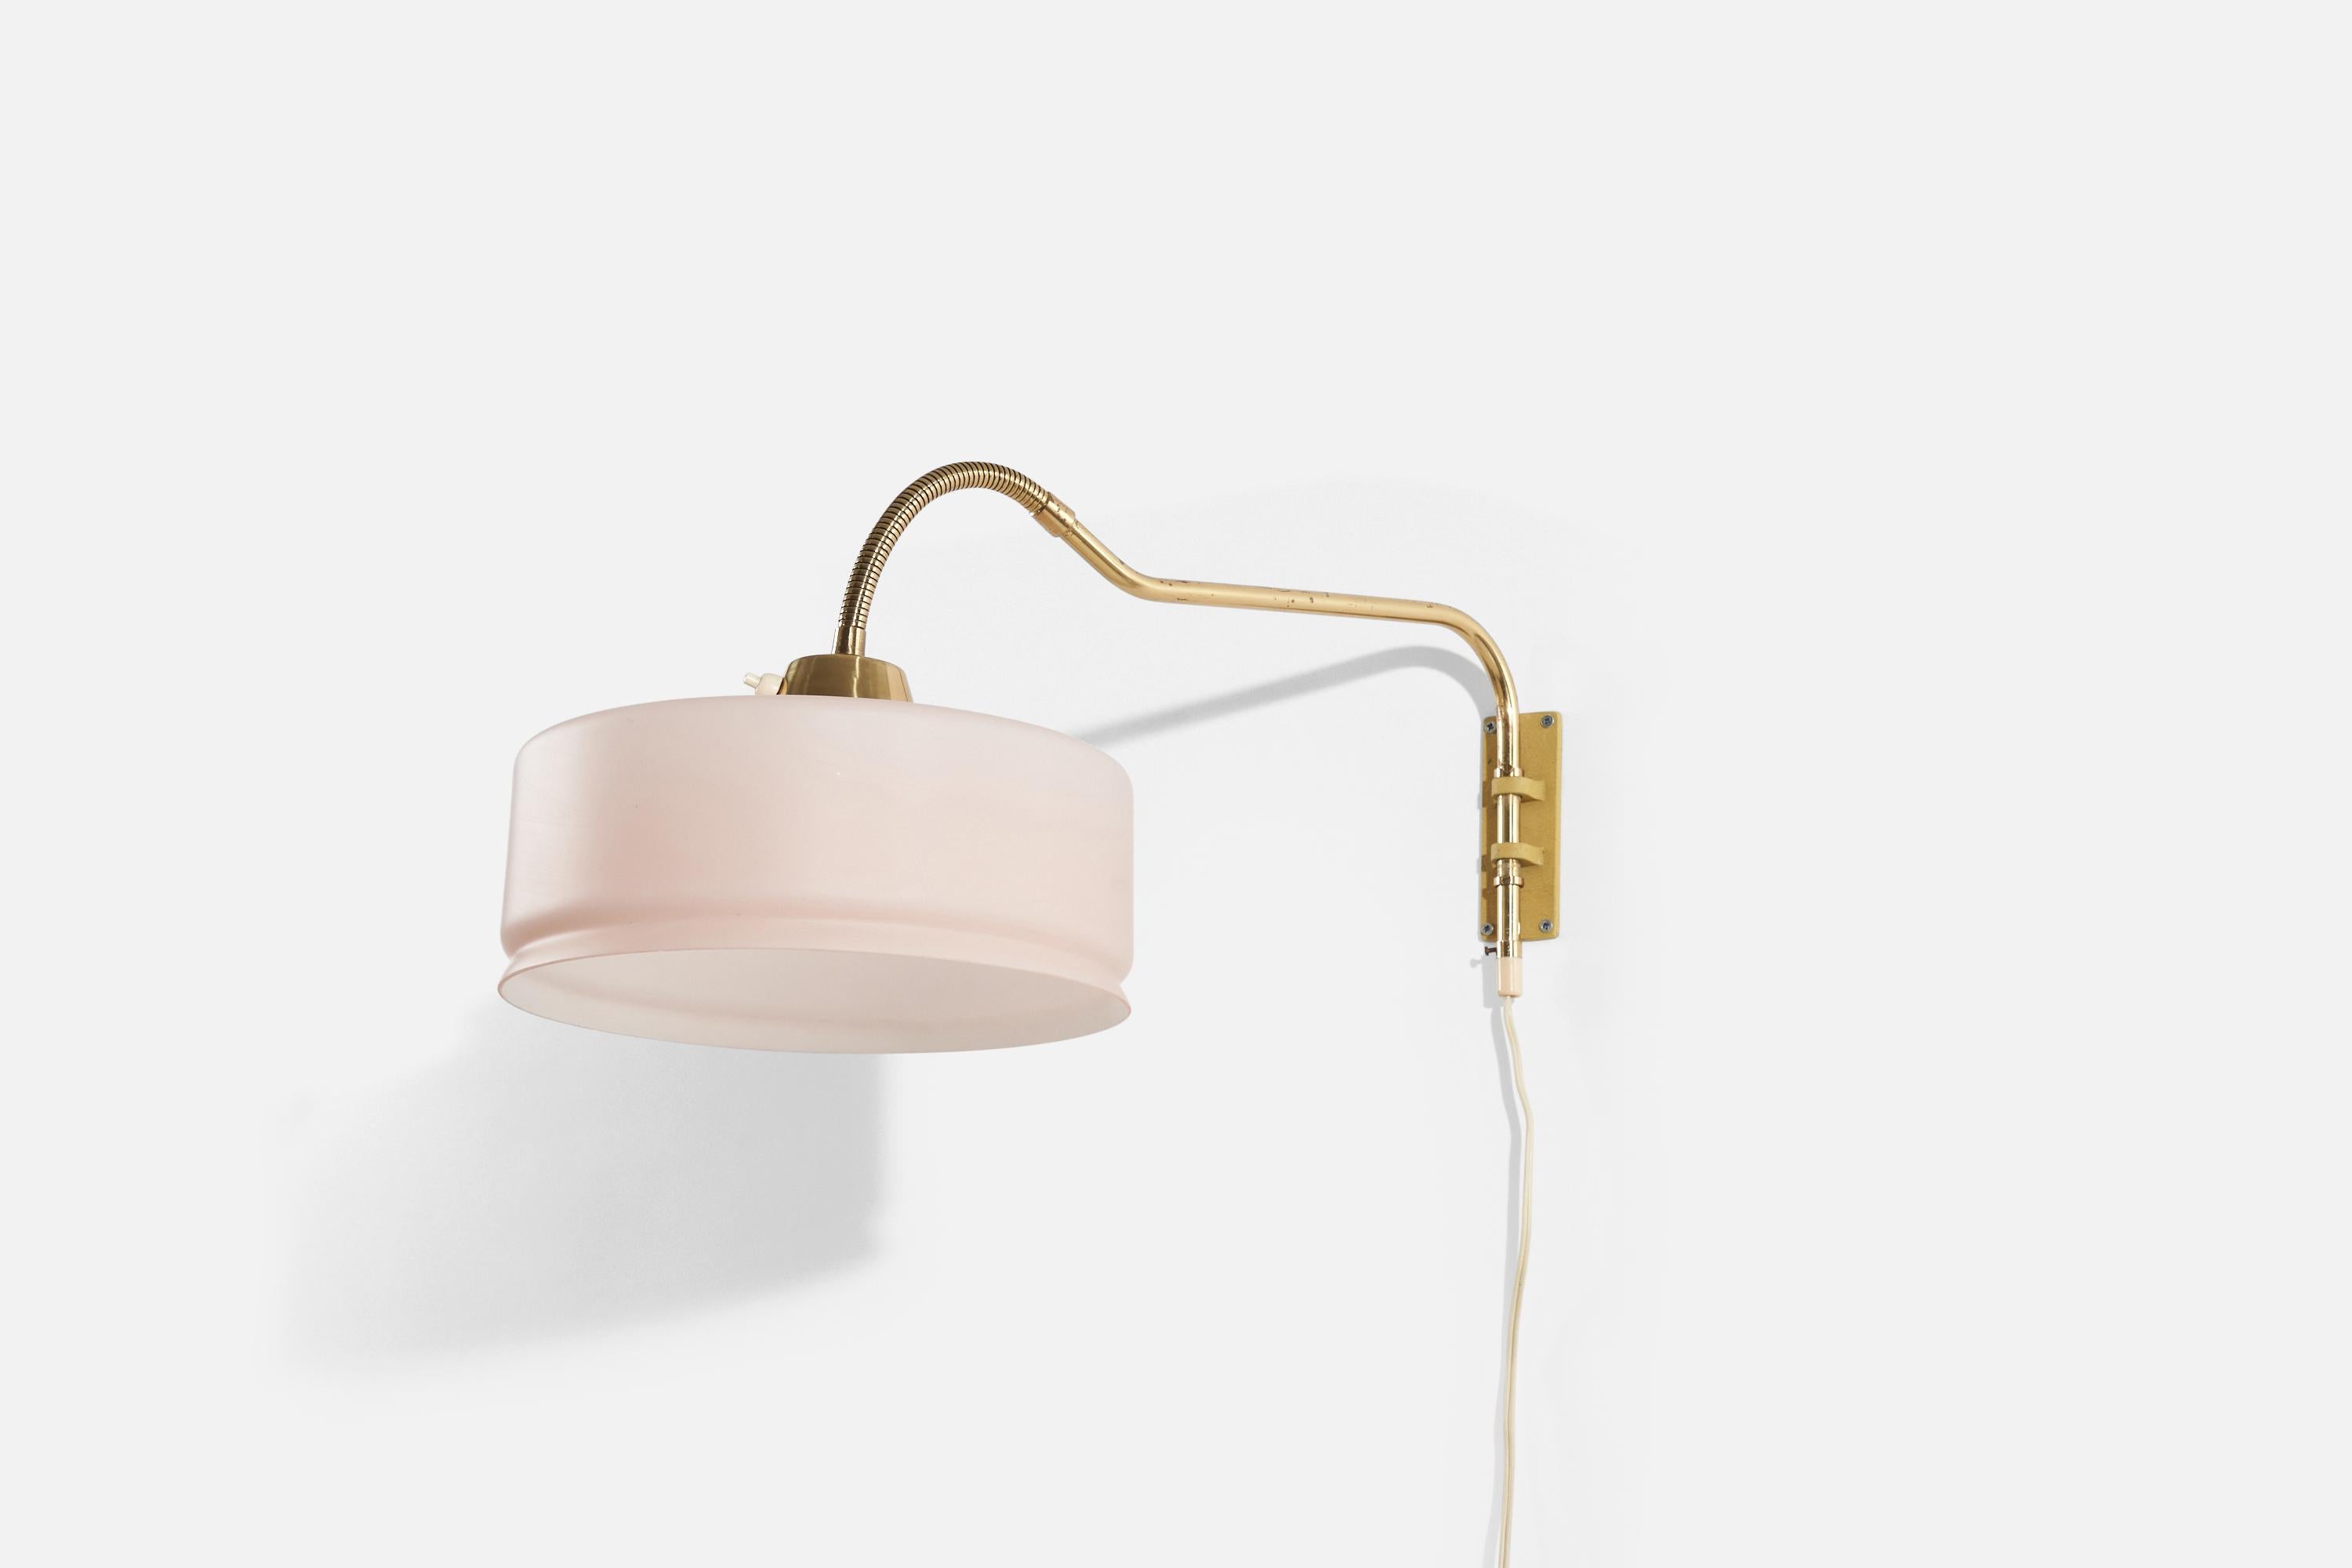 An adjustable, brass and glass wall light designed and produced in Sweden, c. 1950s.

Variable dimensions. Dimensions listed refer to the wall light mounted as illustrated in first image. 

Dimensions of back plate (inches) : 5.25 x 1.875 x